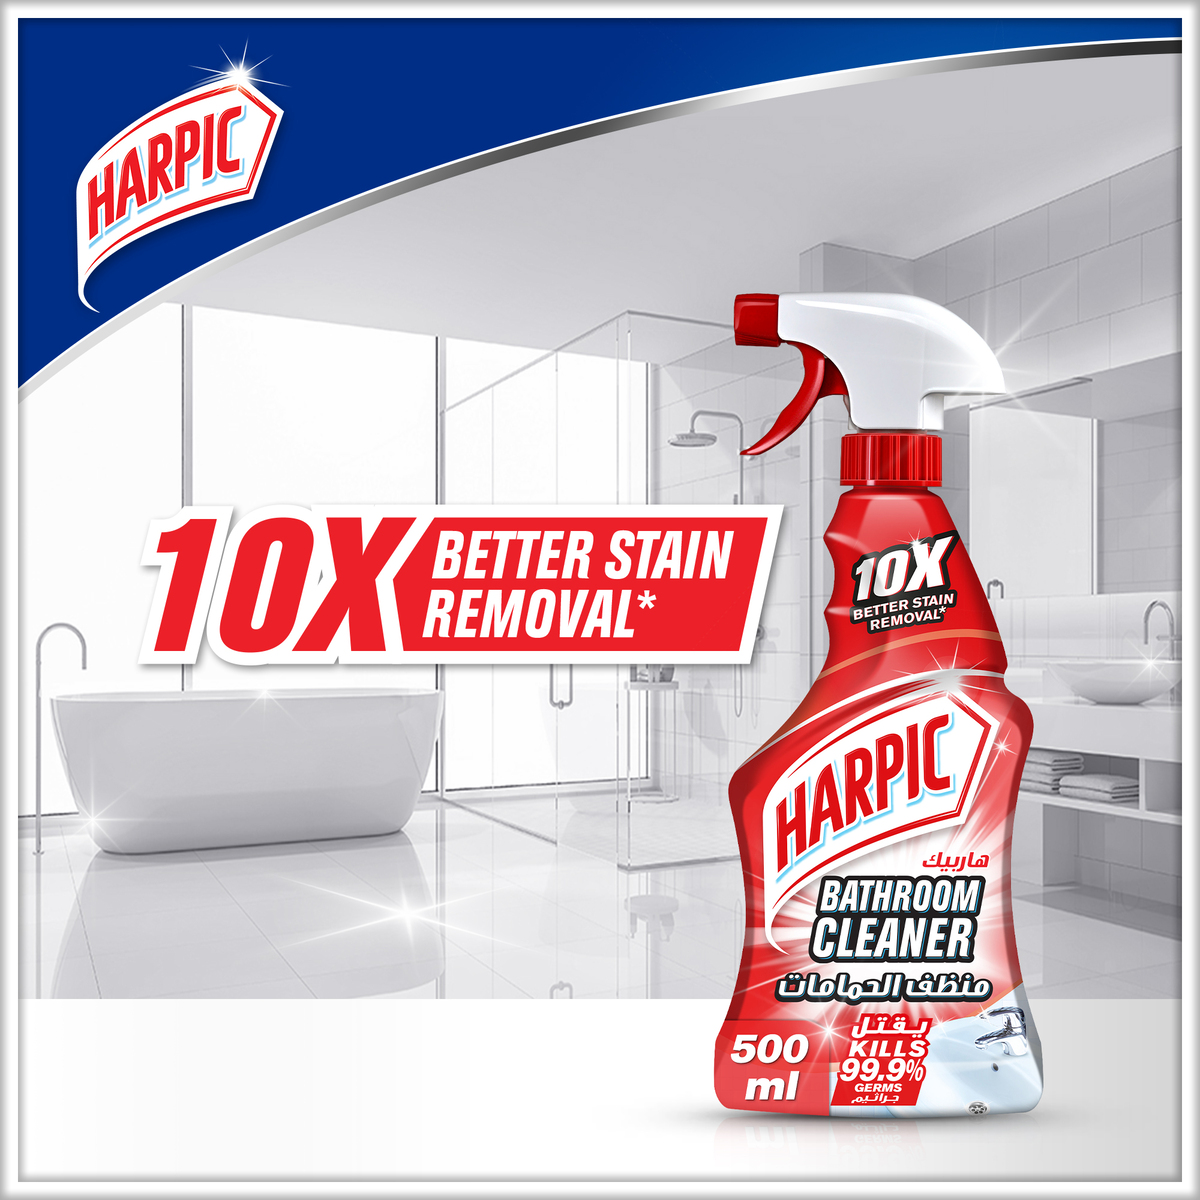 Harpic Bathroom Cleaner Trigger Spray for 10X Better Stain Removal 2 x 500 ml